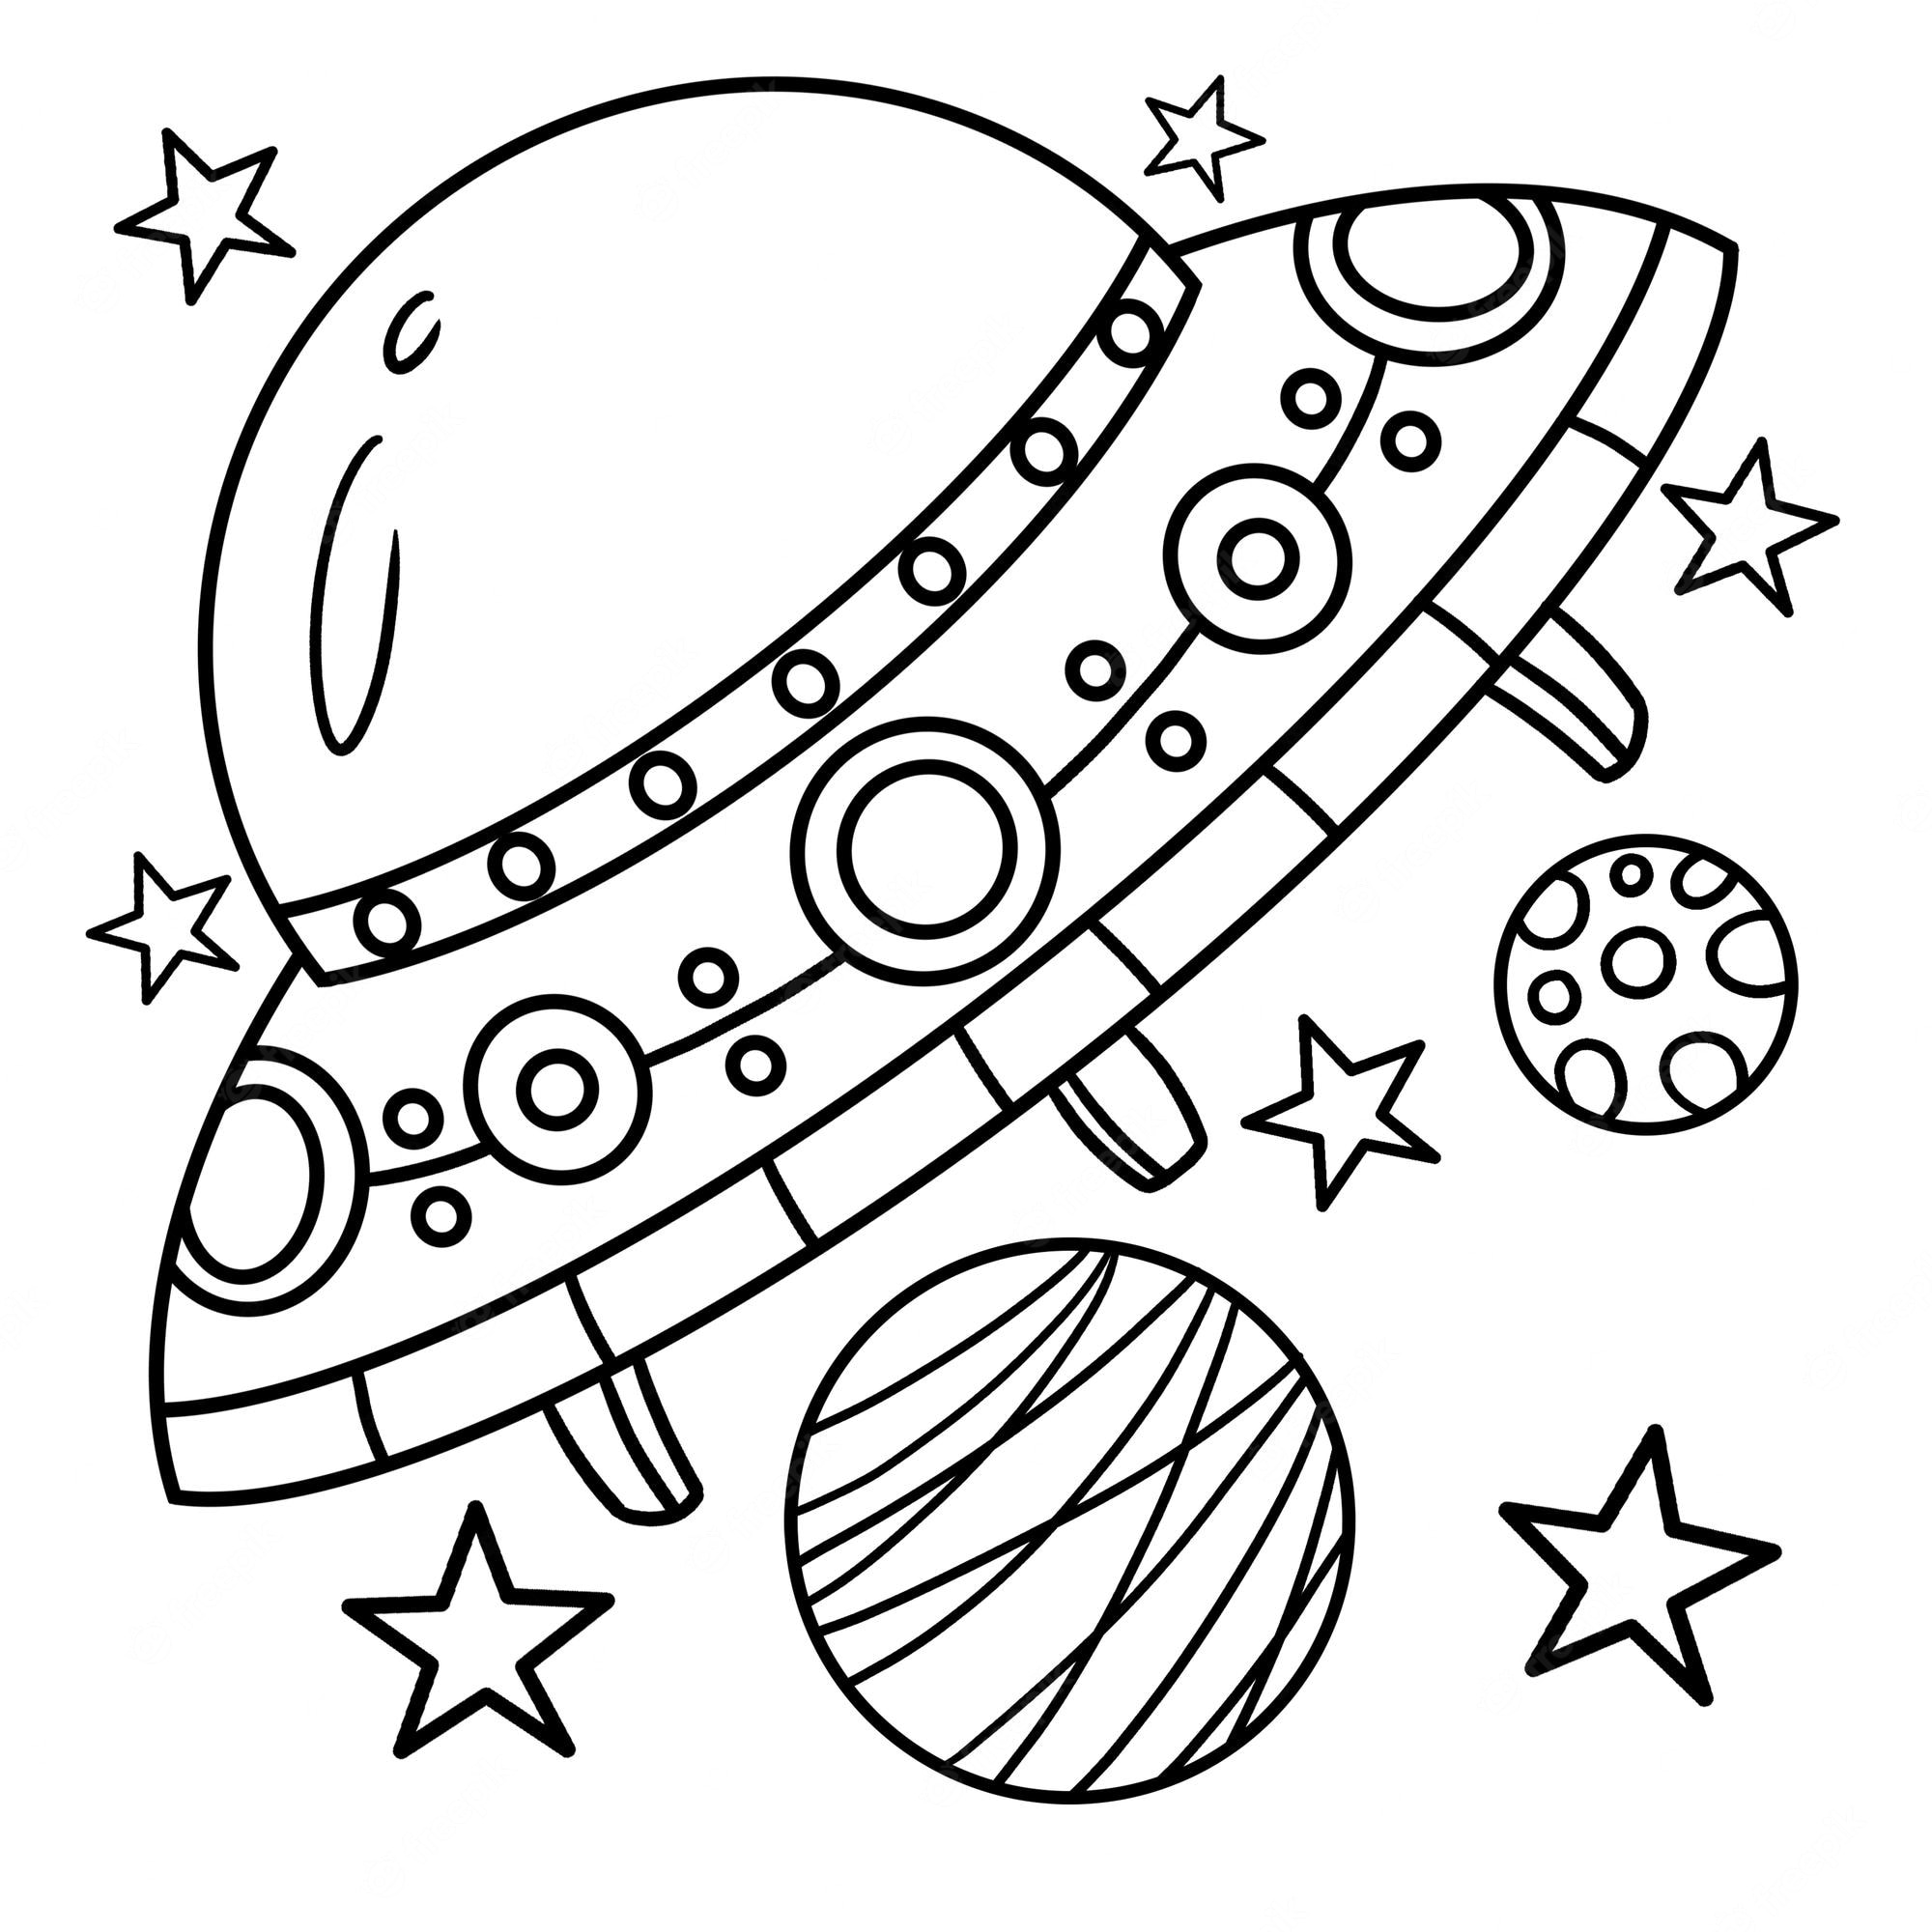 Premium Vector | Ufo spaceship coloring page for kids